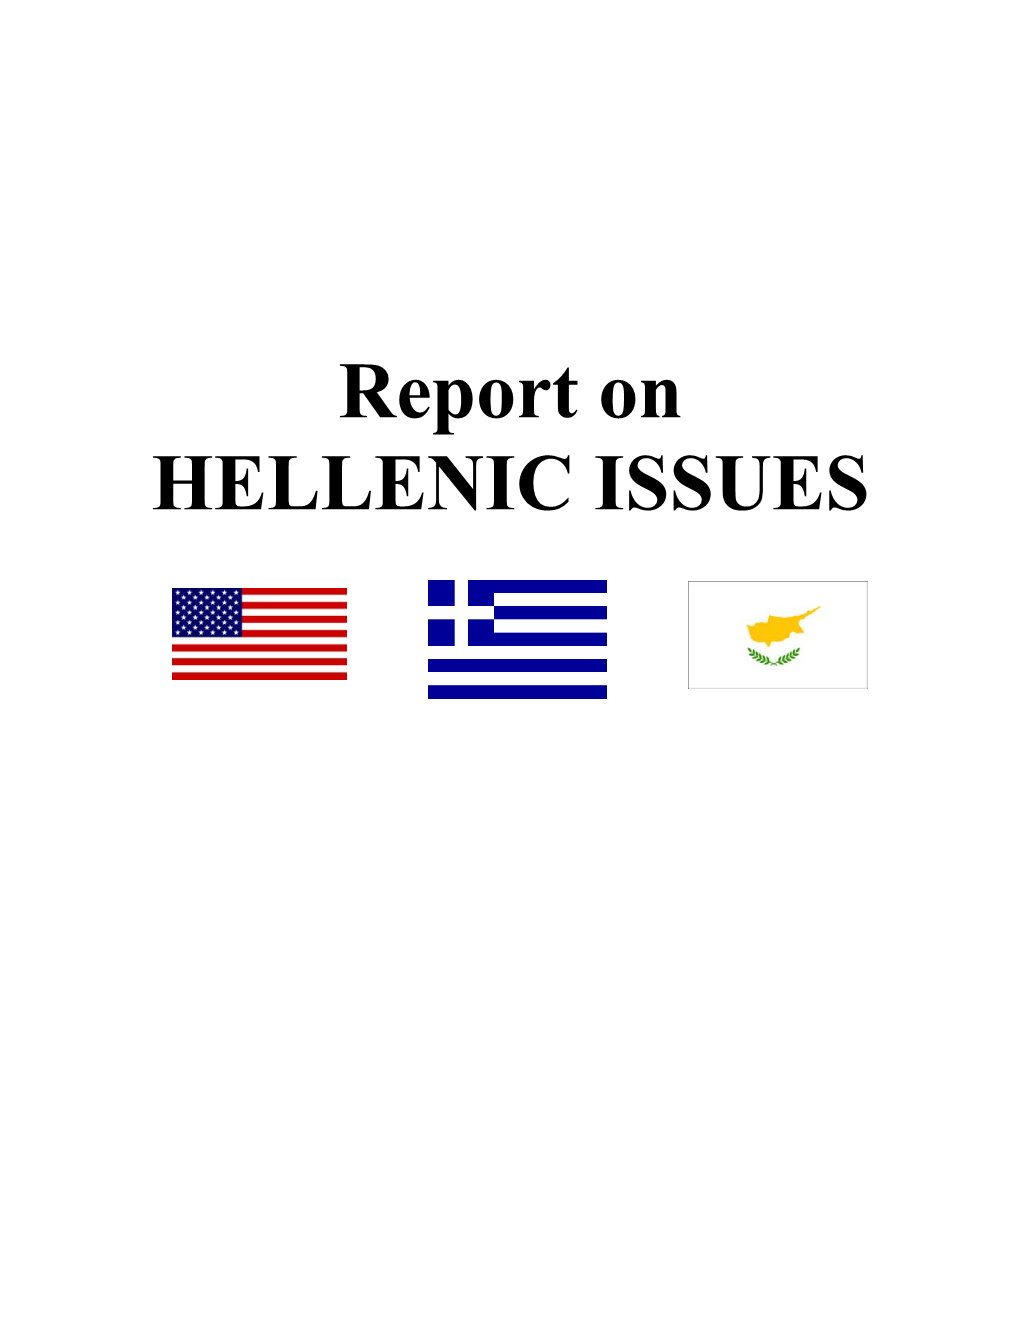 Report on HELLENIC ISSUES